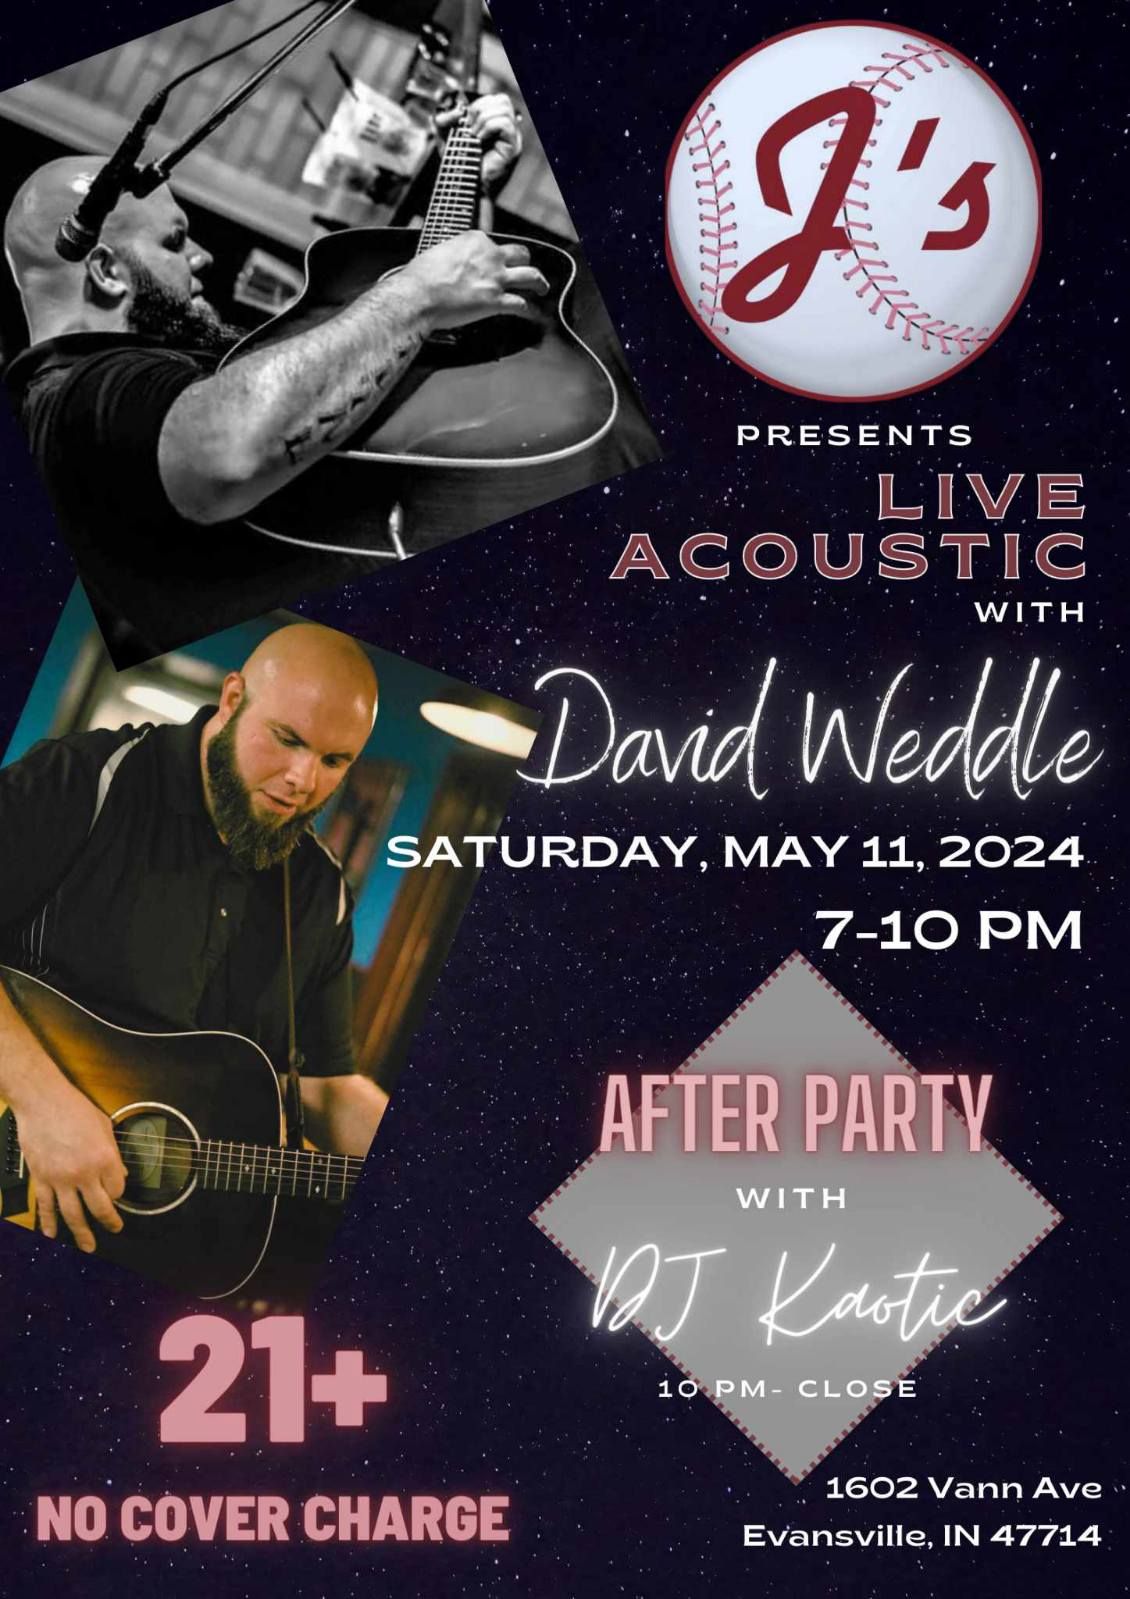 David Weddle Live Acoustic @ J's Sports Bar and Grill!